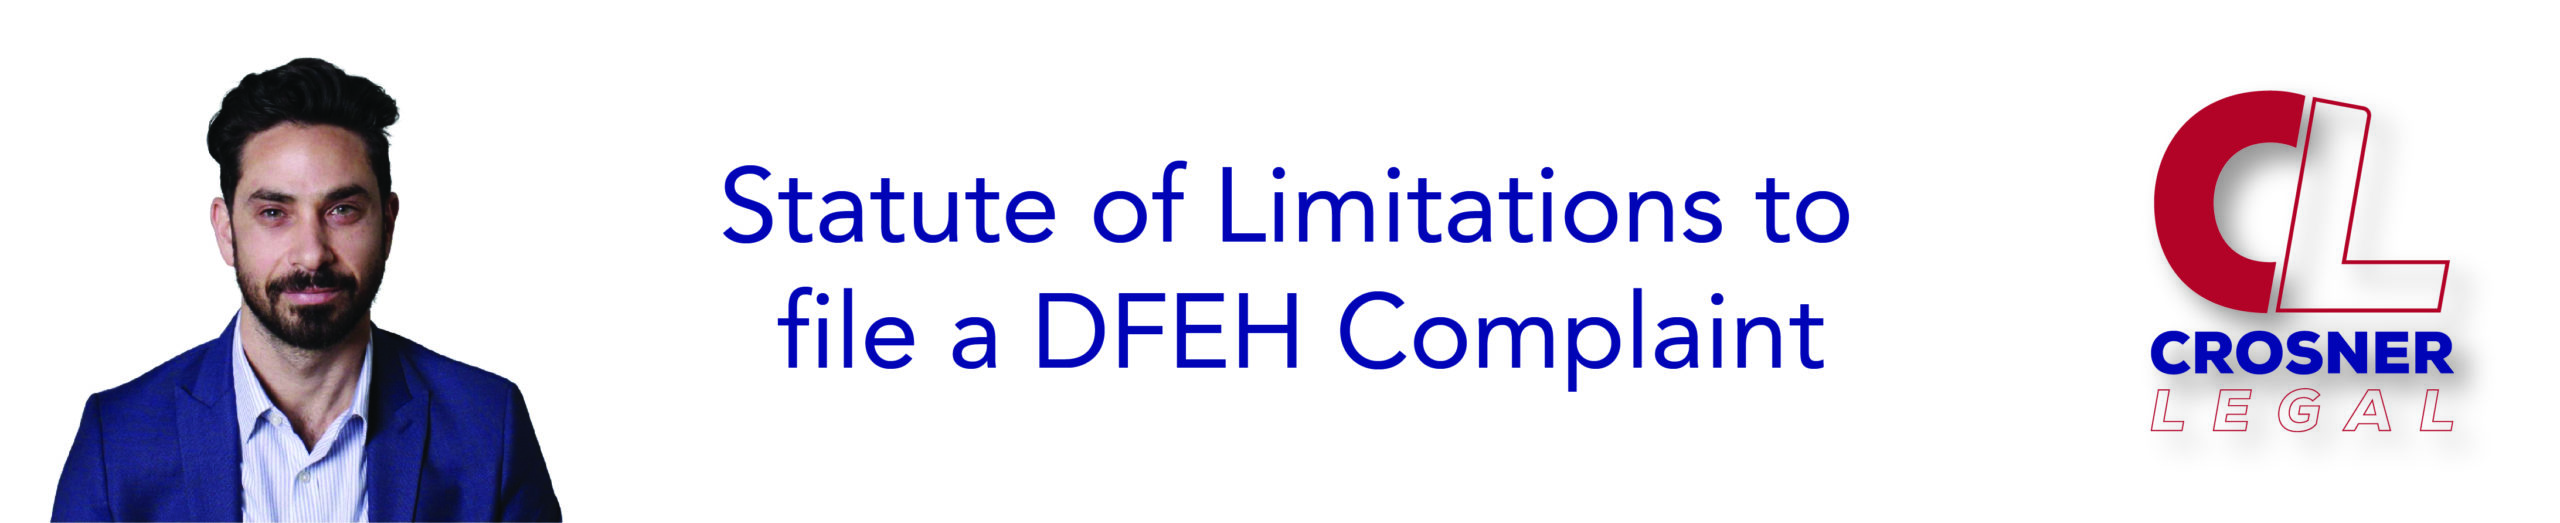 Statute of Limitations to file a DFEH Complaint